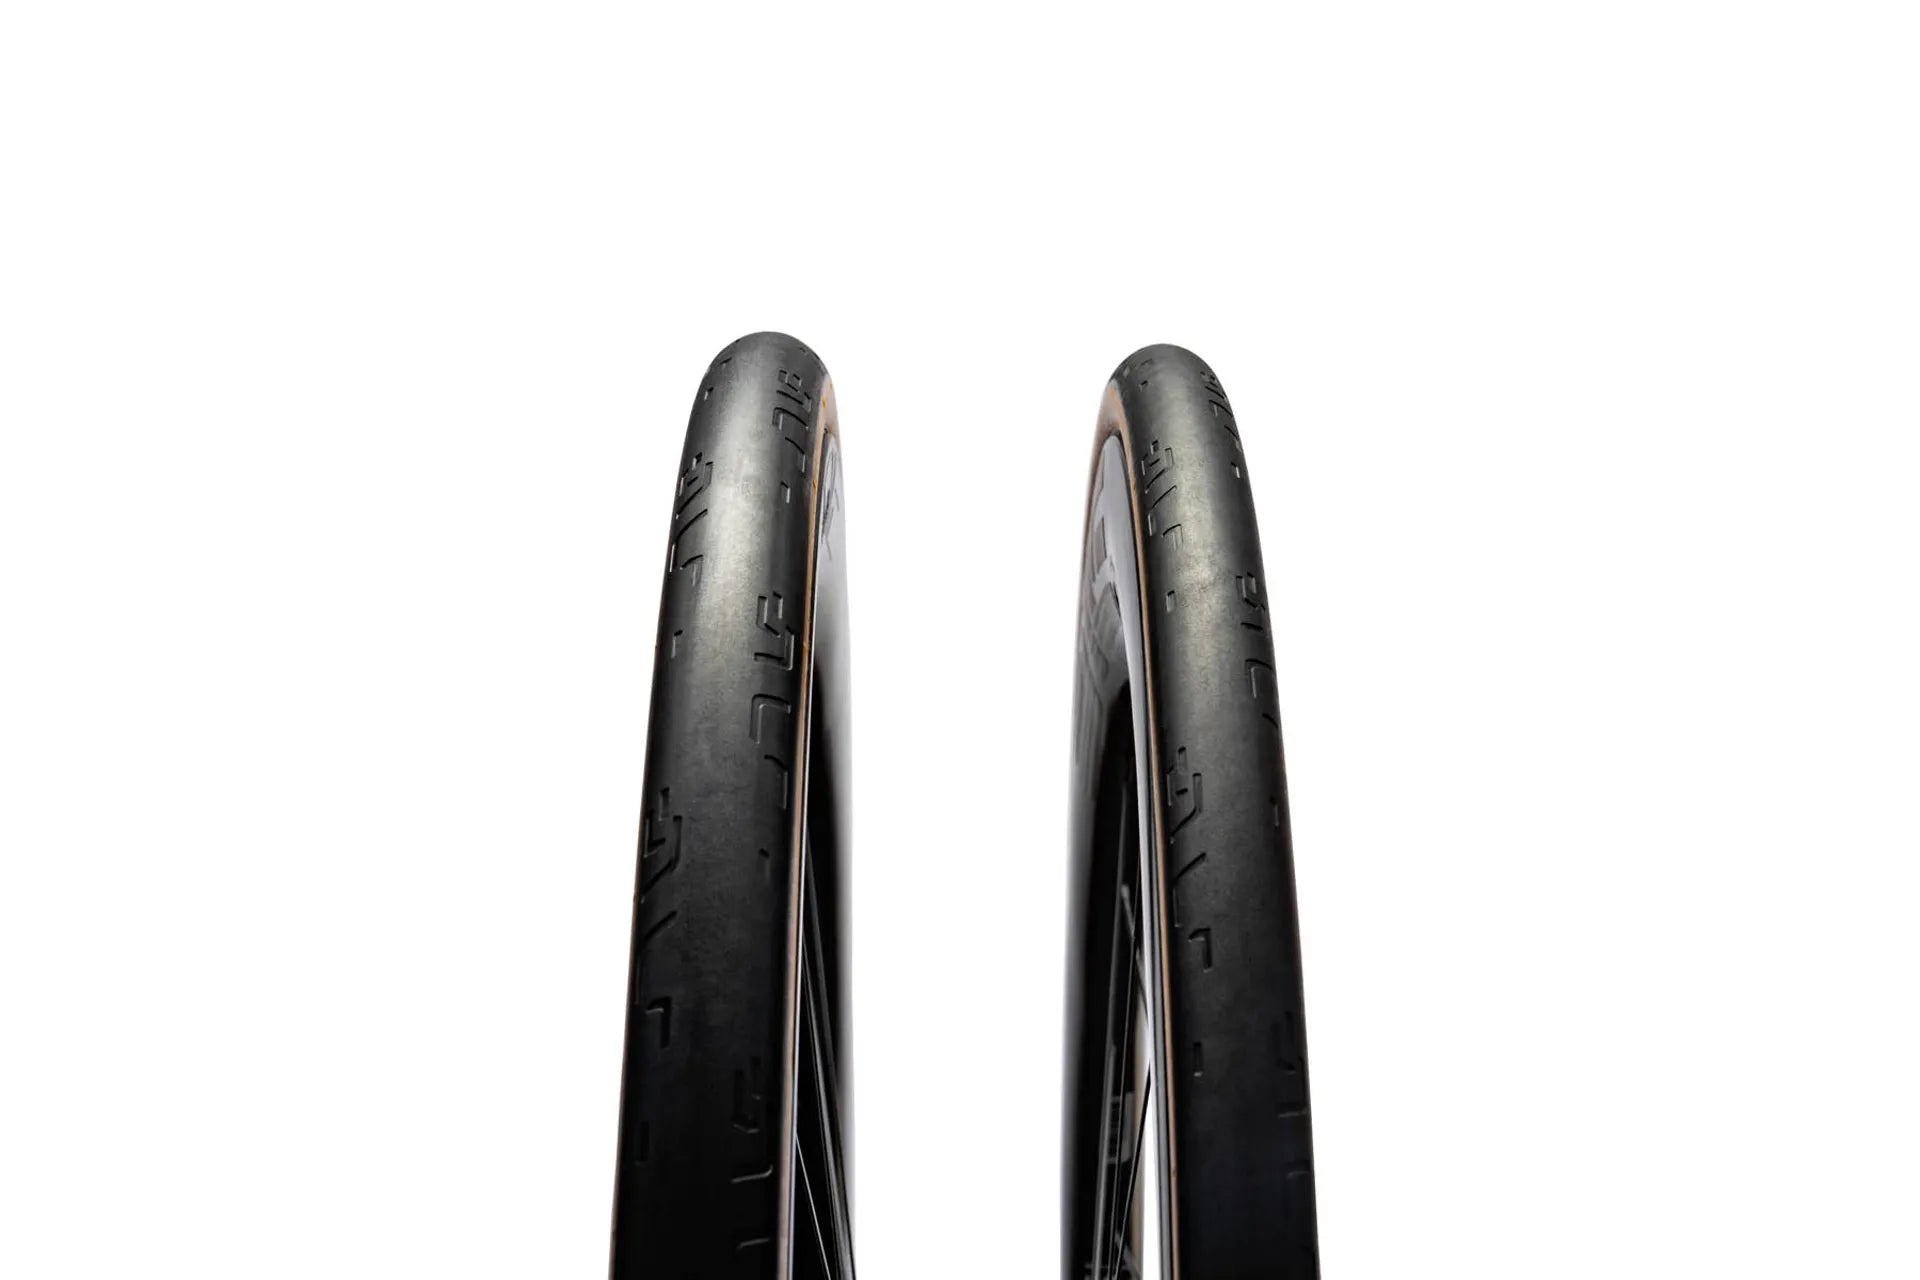 The Bici Guide to Tubeless vs. Tubes